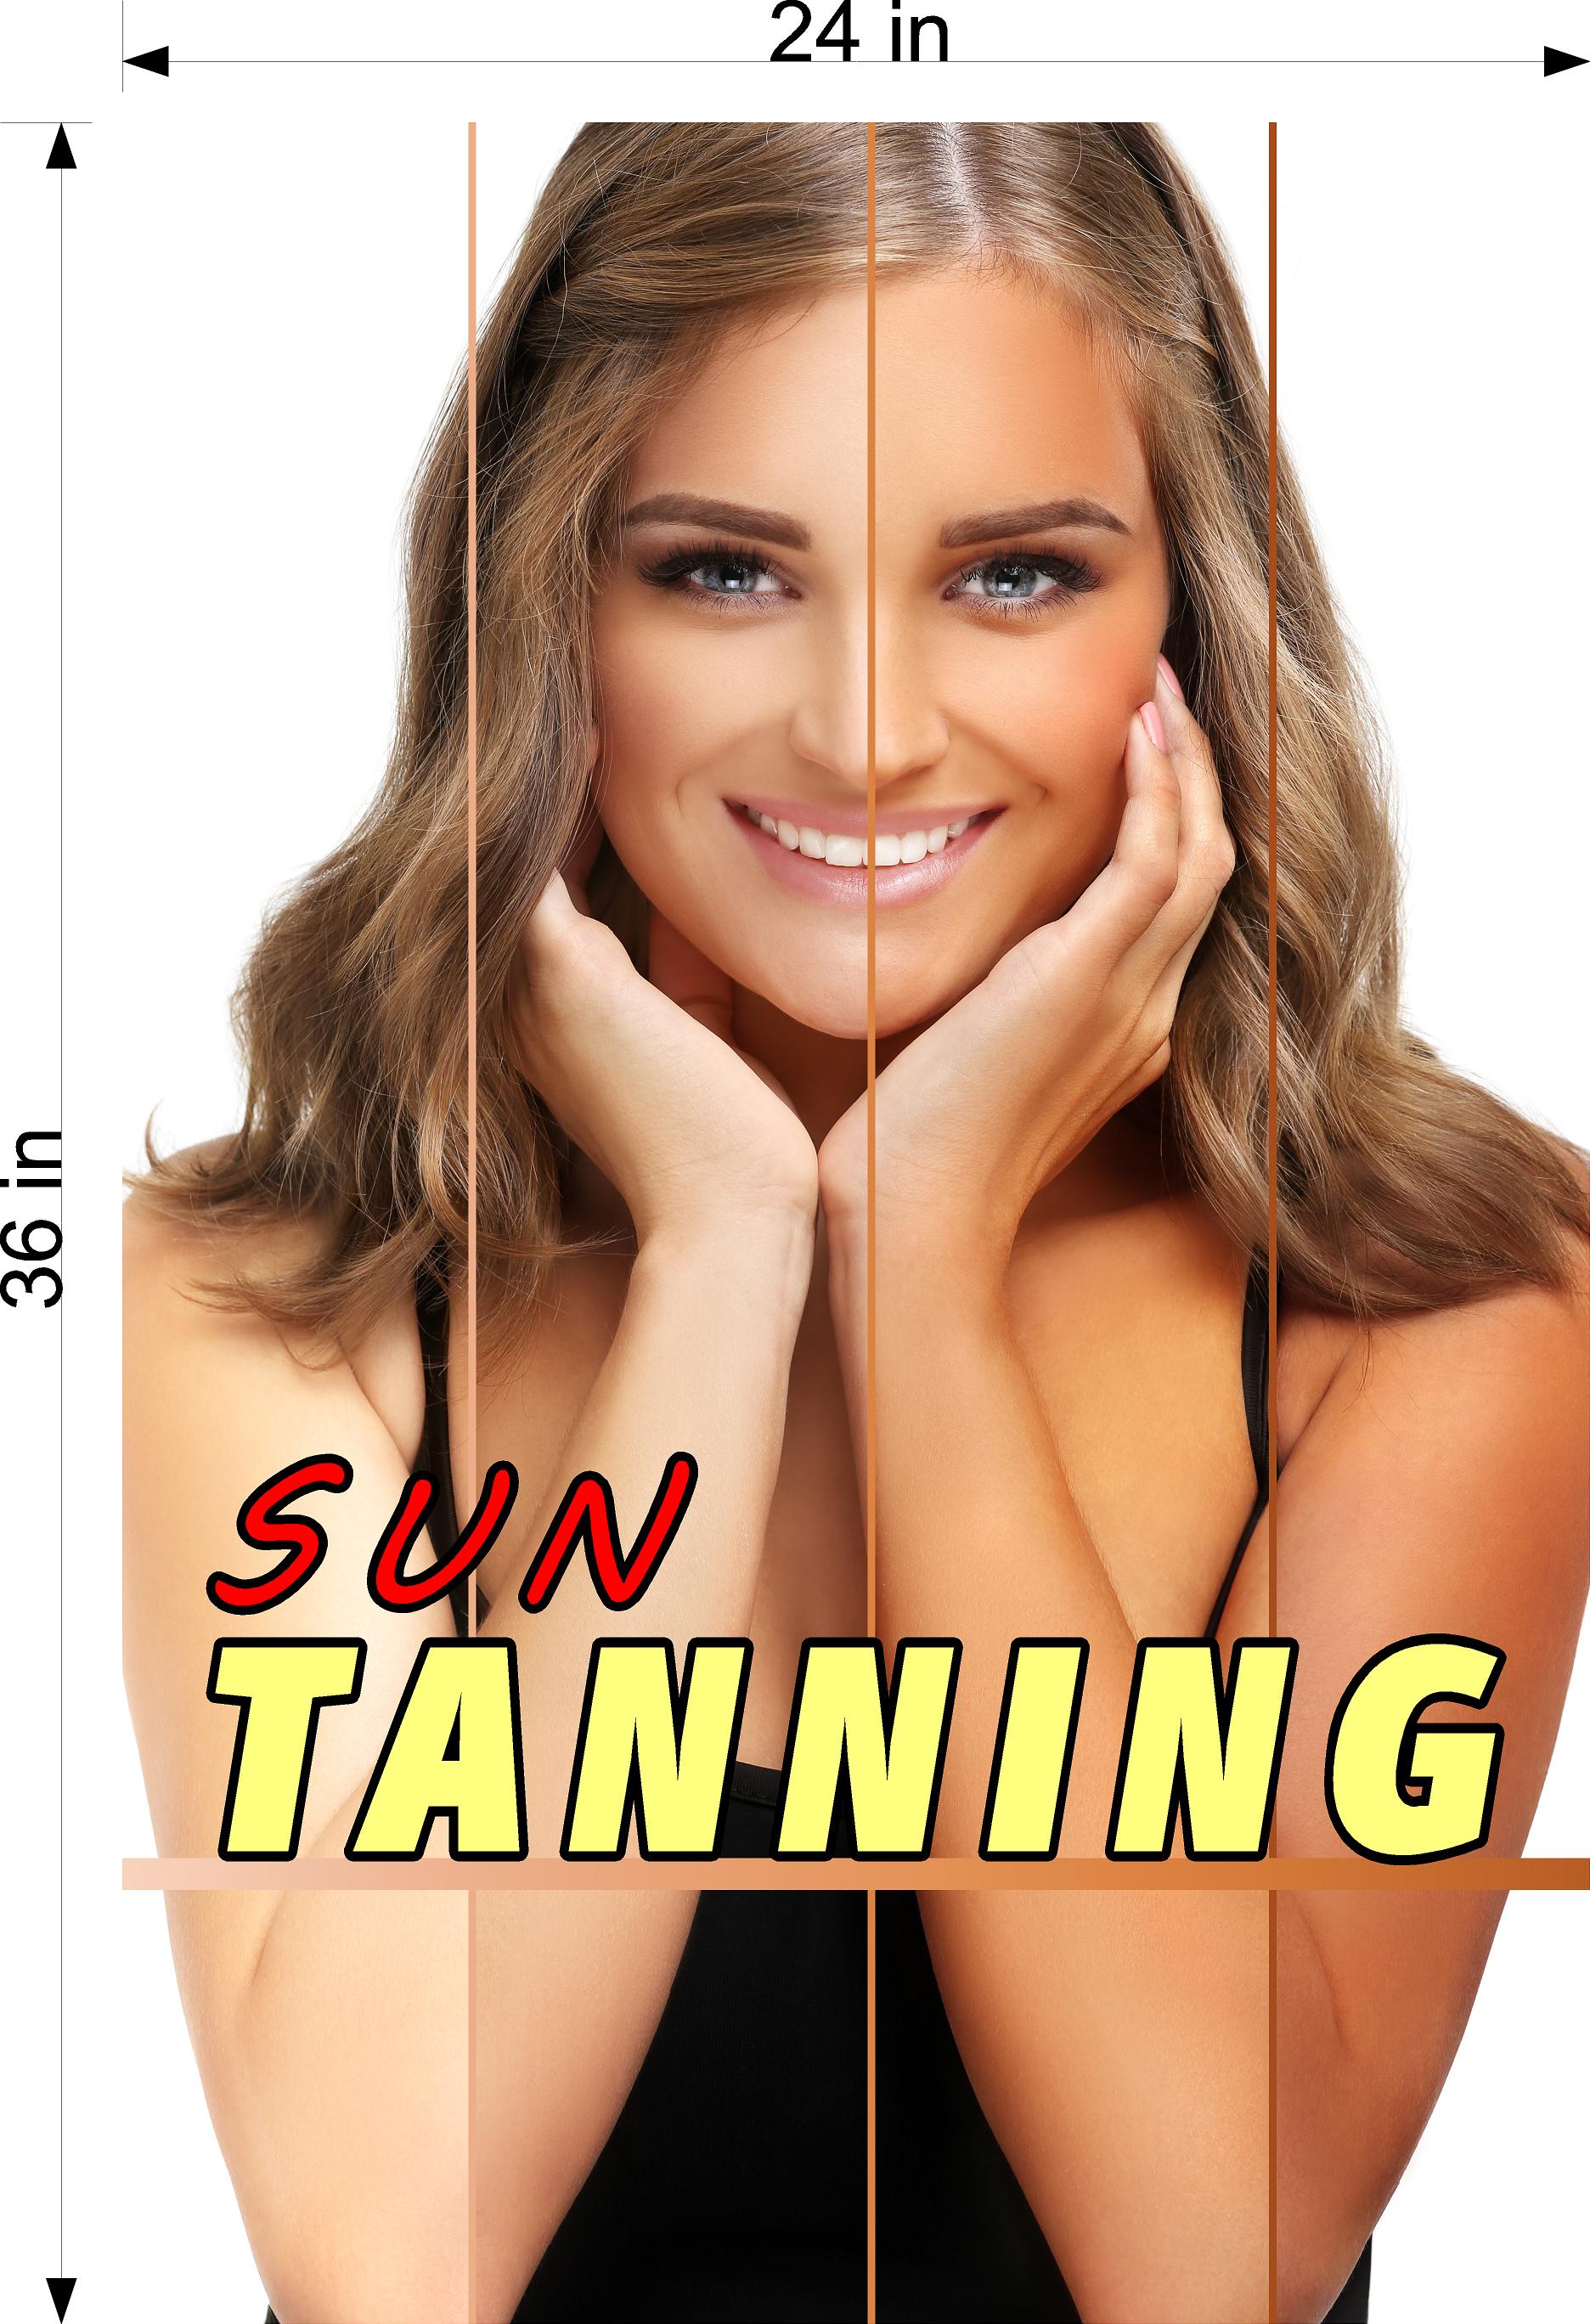 Tanning 01 Photo-Realistic Paper Poster Premium Interior Inside Sign Wall Window Non-Laminated Vertical